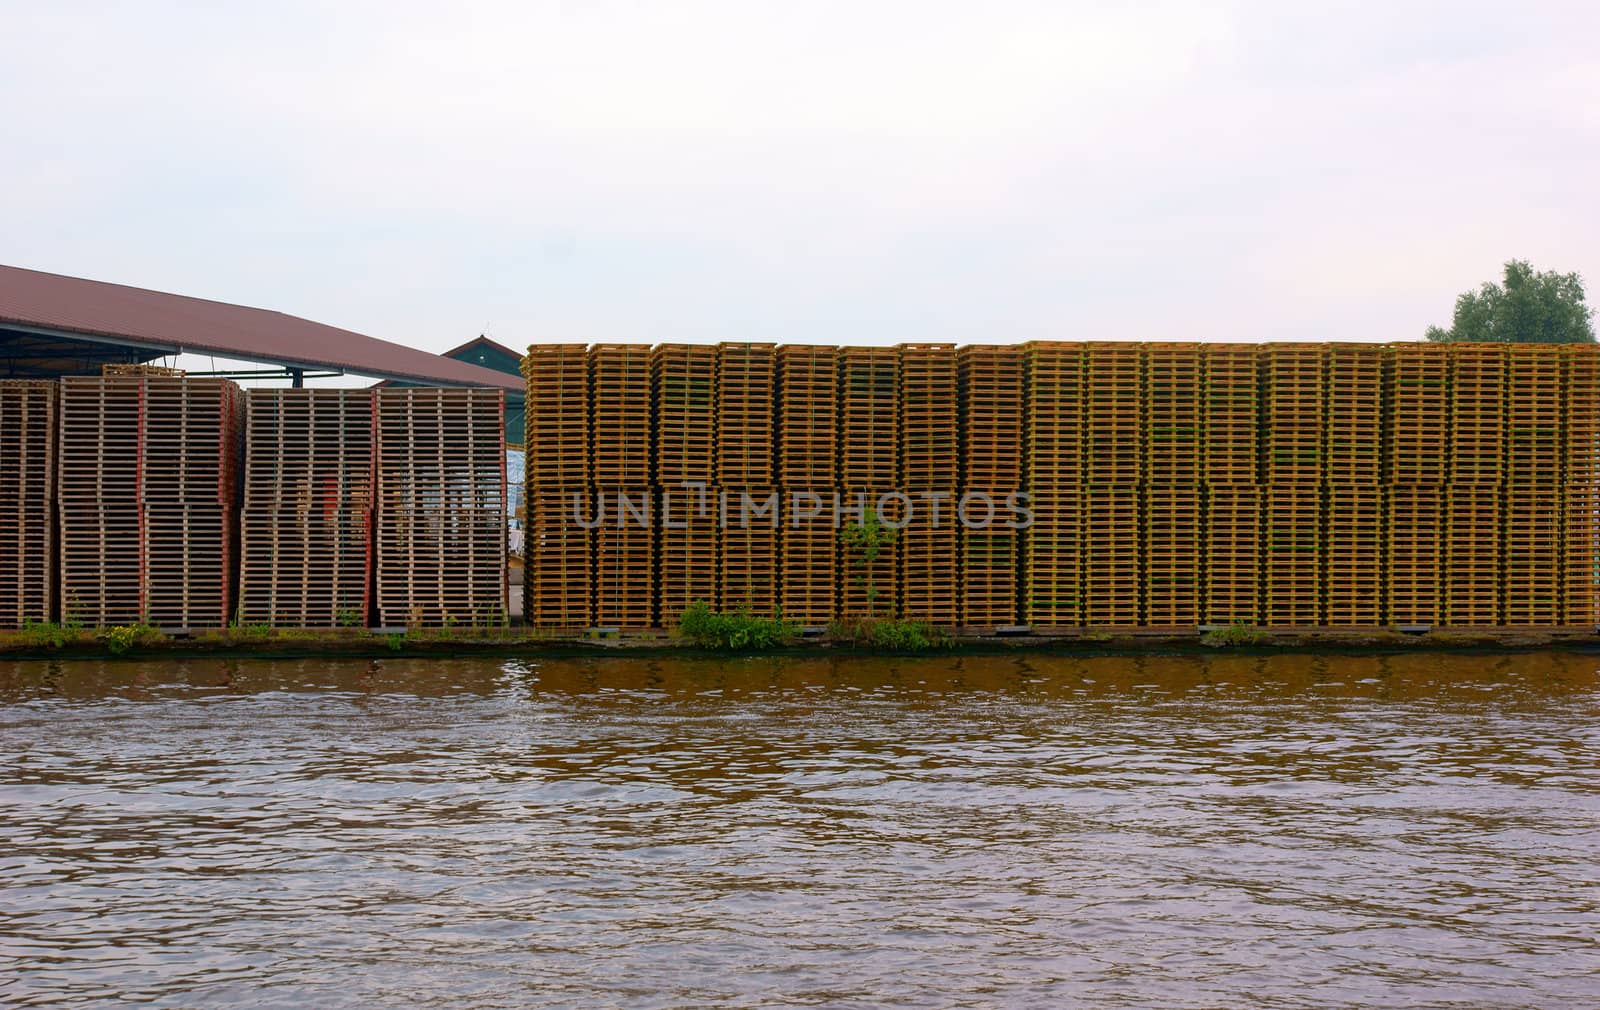 A wall built with wooden pallets